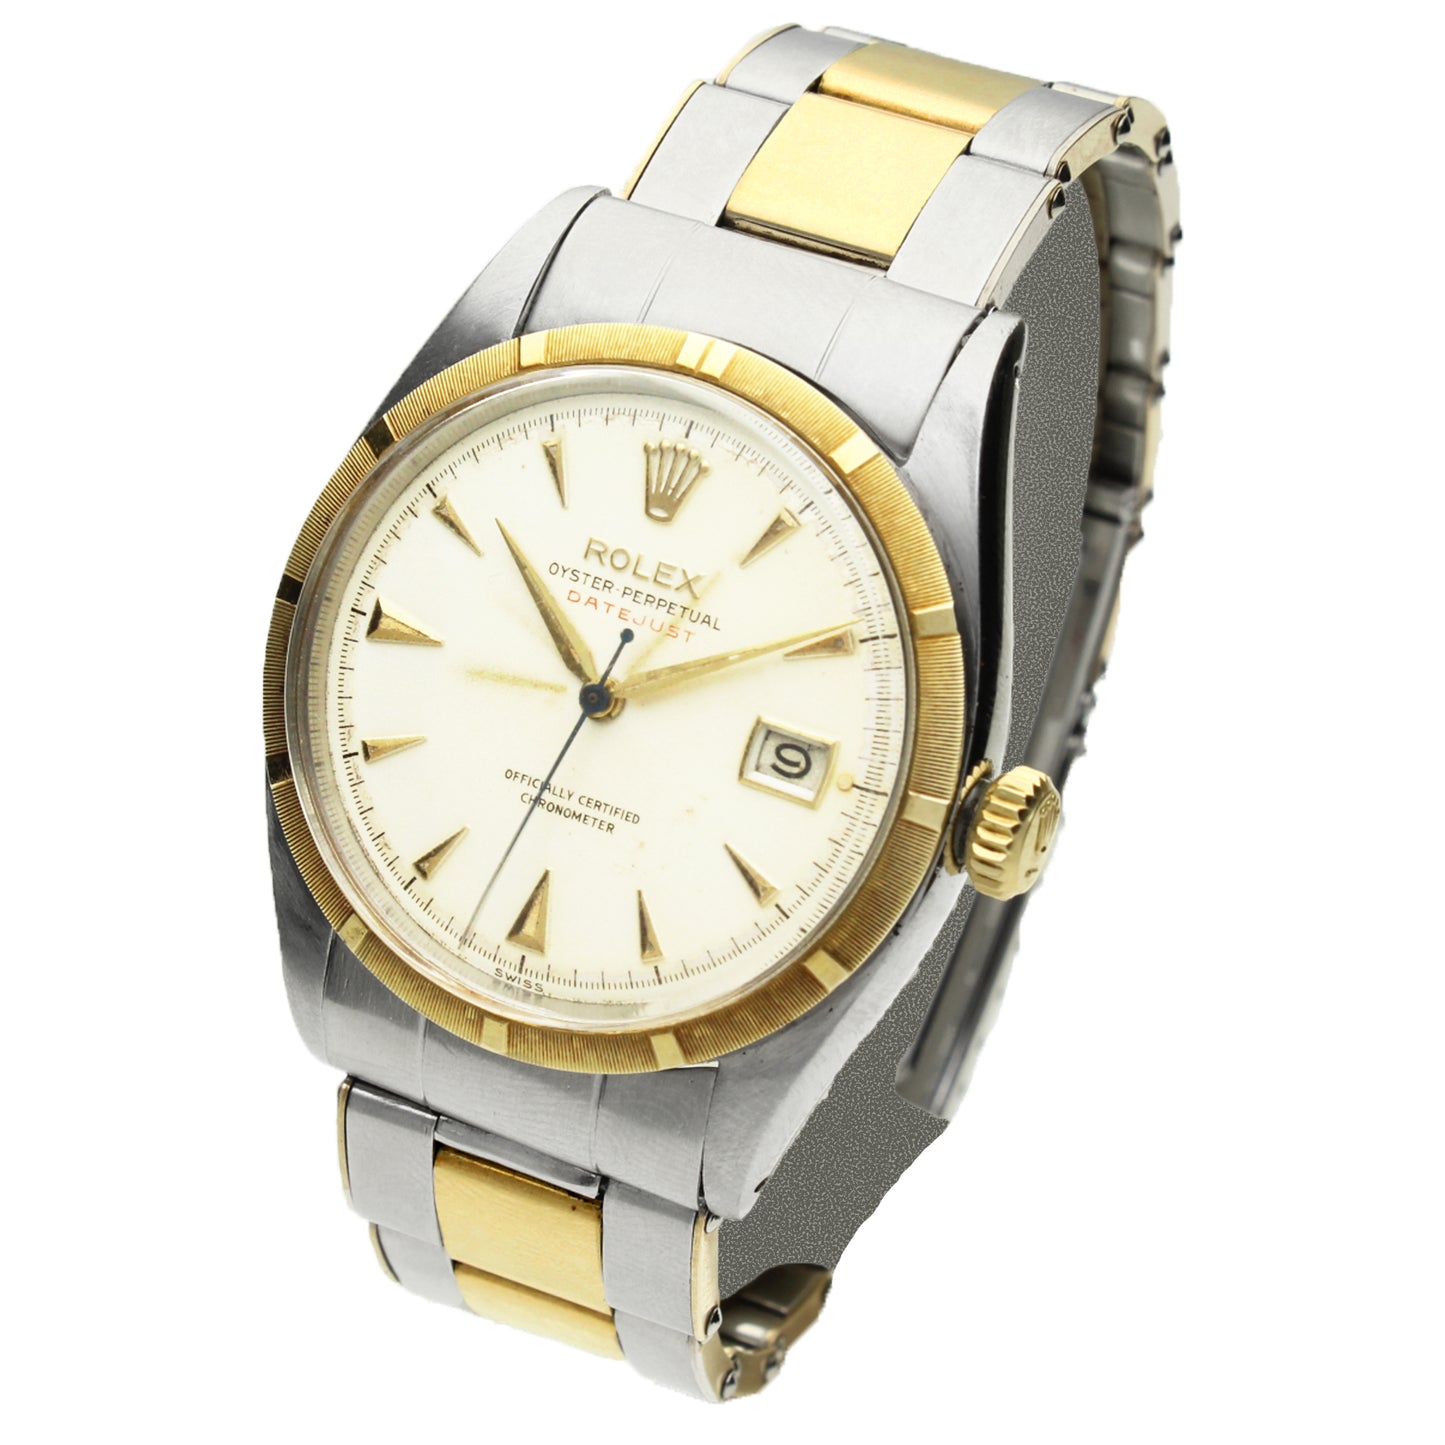 Stainless steel & 18ct yellow gold Rolex Datejust Oyster Perpetual wristwatch. Made 1950